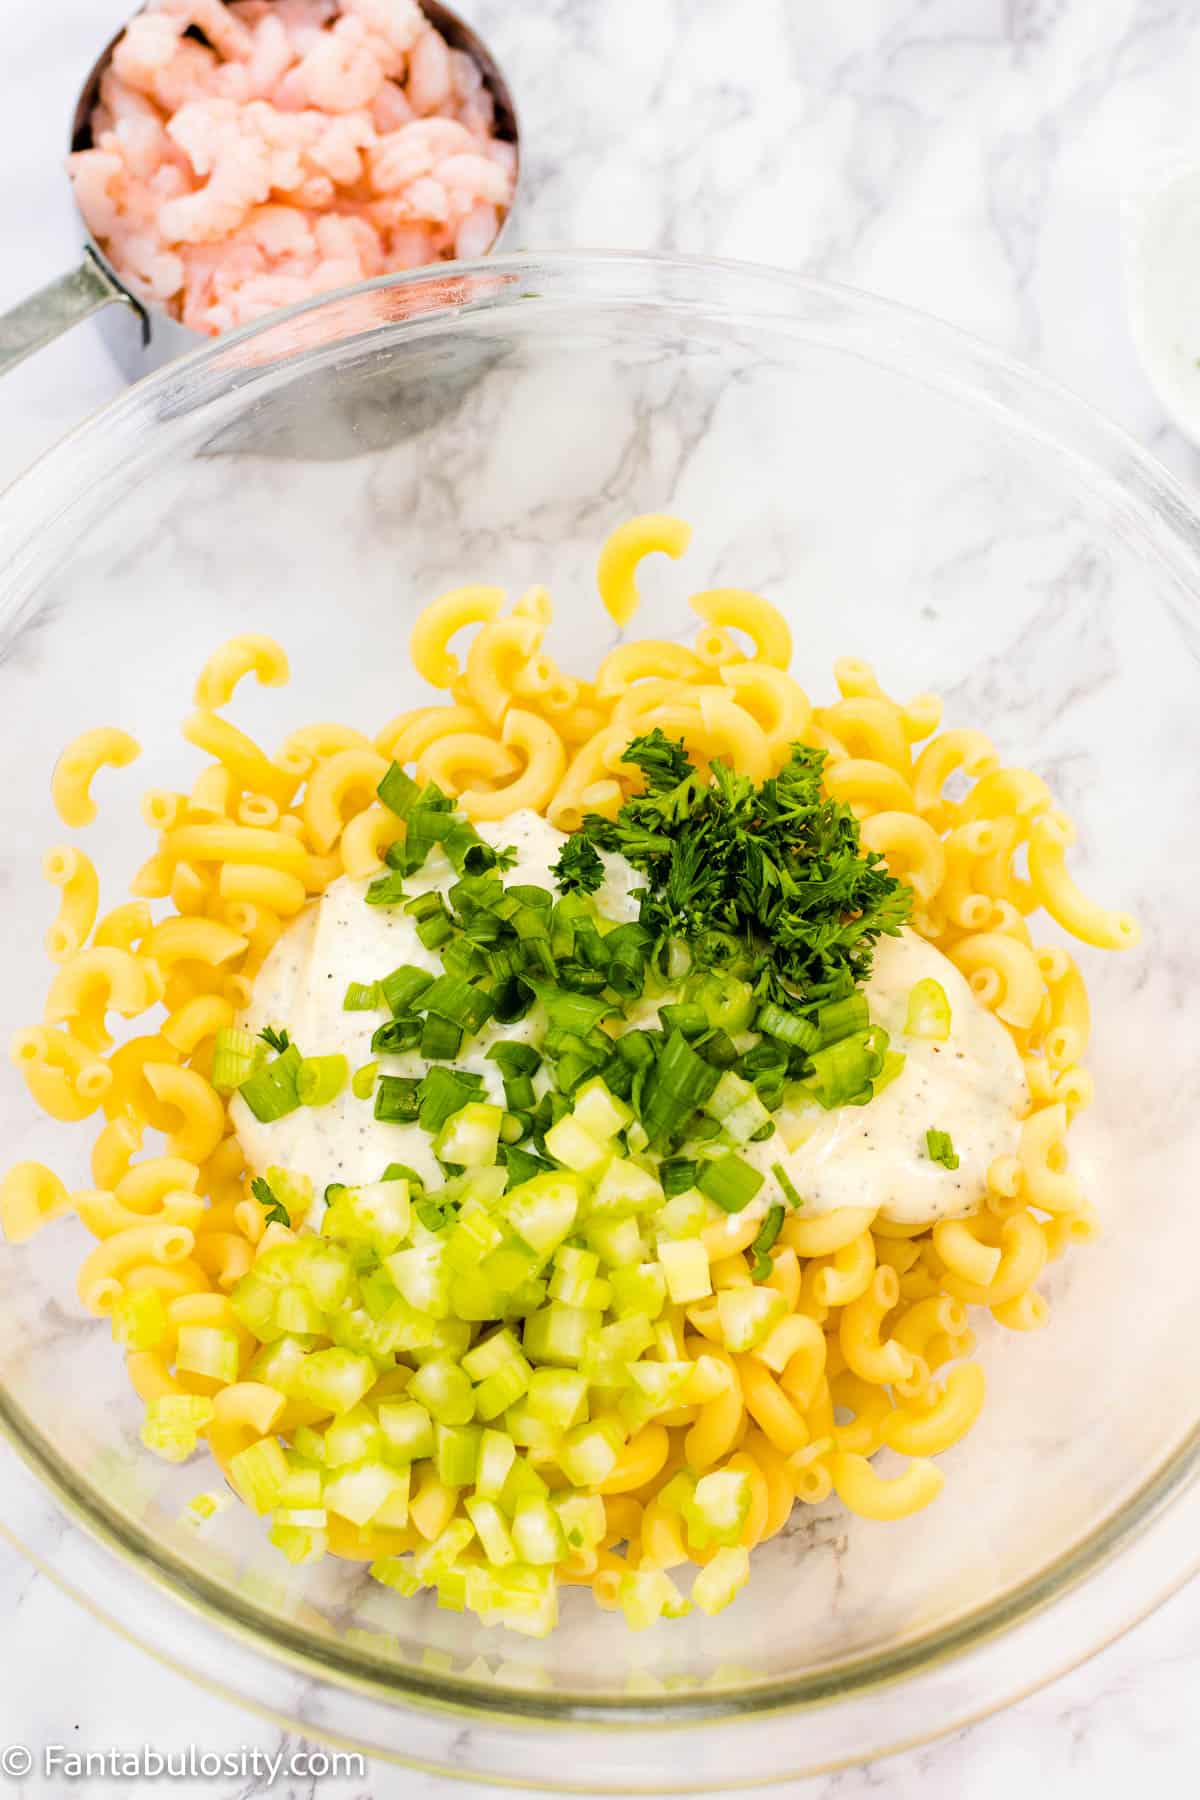 Combine your macaroni, celery, green onions and parsley.